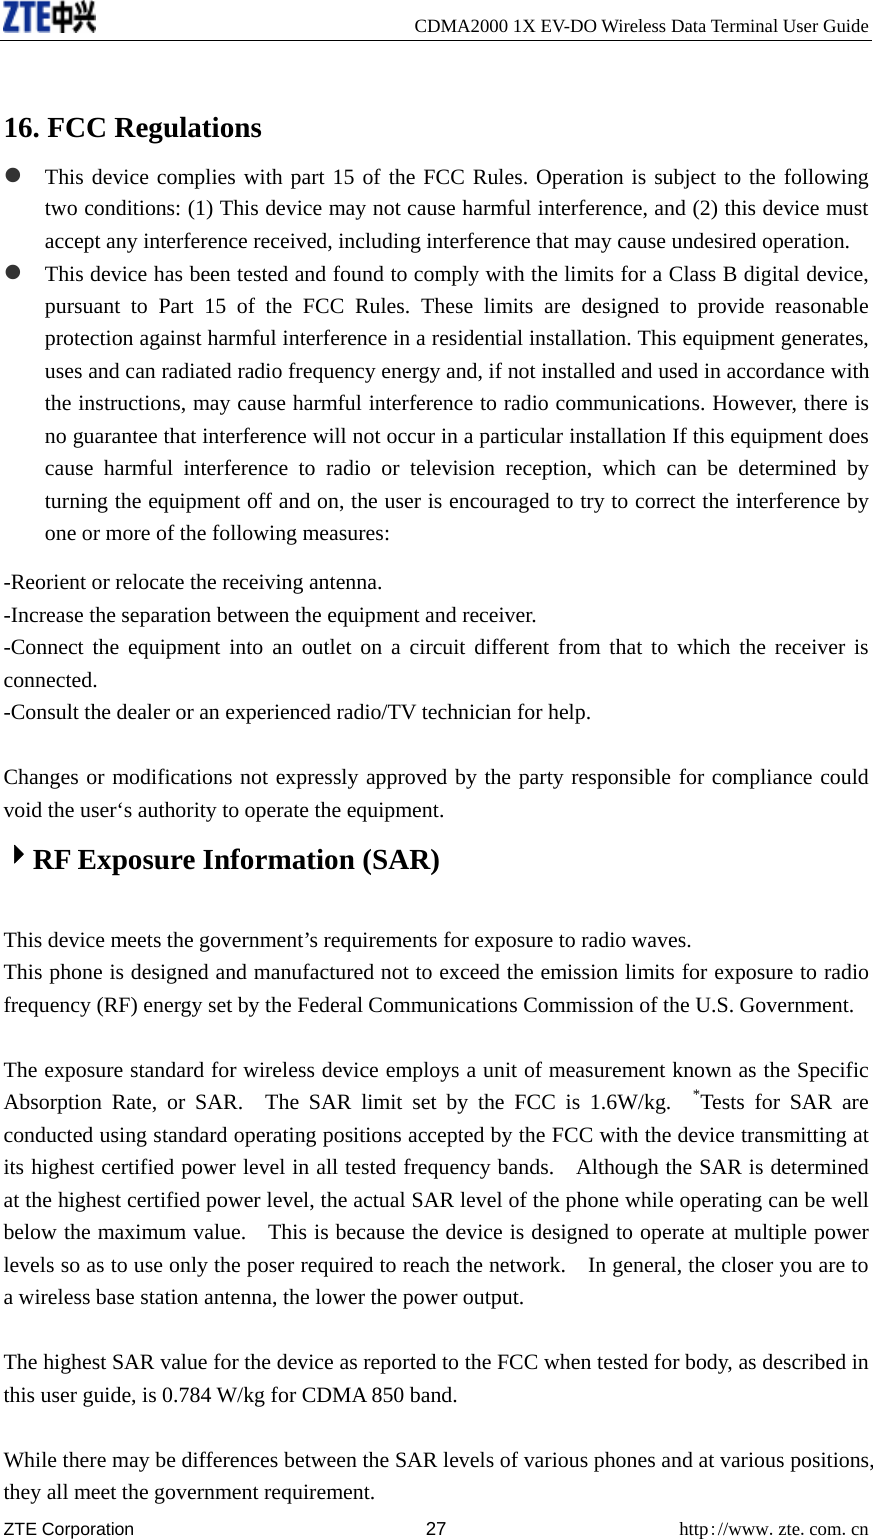     CDMA2000 1X EV-DO Wireless Data Terminal User Guide ZTE Corporation 27 http://www.zte.com.cn   16. FCC Regulations z This device complies with part 15 of the FCC Rules. Operation is subject to the following two conditions: (1) This device may not cause harmful interference, and (2) this device must accept any interference received, including interference that may cause undesired operation. z This device has been tested and found to comply with the limits for a Class B digital device, pursuant to Part 15 of the FCC Rules. These limits are designed to provide reasonable protection against harmful interference in a residential installation. This equipment generates, uses and can radiated radio frequency energy and, if not installed and used in accordance with the instructions, may cause harmful interference to radio communications. However, there is no guarantee that interference will not occur in a particular installation If this equipment does cause harmful interference to radio or television reception, which can be determined by turning the equipment off and on, the user is encouraged to try to correct the interference by one or more of the following measures: -Reorient or relocate the receiving antenna. -Increase the separation between the equipment and receiver. -Connect the equipment into an outlet on a circuit different from that to which the receiver is connected. -Consult the dealer or an experienced radio/TV technician for help.  Changes or modifications not expressly approved by the party responsible for compliance could void the user‘s authority to operate the equipment. 4RF Exposure Information (SAR)    This device meets the government’s requirements for exposure to radio waves. This phone is designed and manufactured not to exceed the emission limits for exposure to radio frequency (RF) energy set by the Federal Communications Commission of the U.S. Government.      The exposure standard for wireless device employs a unit of measurement known as the Specific Absorption Rate, or SAR.  The SAR limit set by the FCC is 1.6W/kg.  *Tests for SAR are conducted using standard operating positions accepted by the FCC with the device transmitting at its highest certified power level in all tested frequency bands.    Although the SAR is determined at the highest certified power level, the actual SAR level of the phone while operating can be well below the maximum value.    This is because the device is designed to operate at multiple power levels so as to use only the poser required to reach the network.    In general, the closer you are to a wireless base station antenna, the lower the power output.  The highest SAR value for the device as reported to the FCC when tested for body, as described in this user guide, is 0.784 W/kg for CDMA 850 band.  While there may be differences between the SAR levels of various phones and at various positions, they all meet the government requirement. 